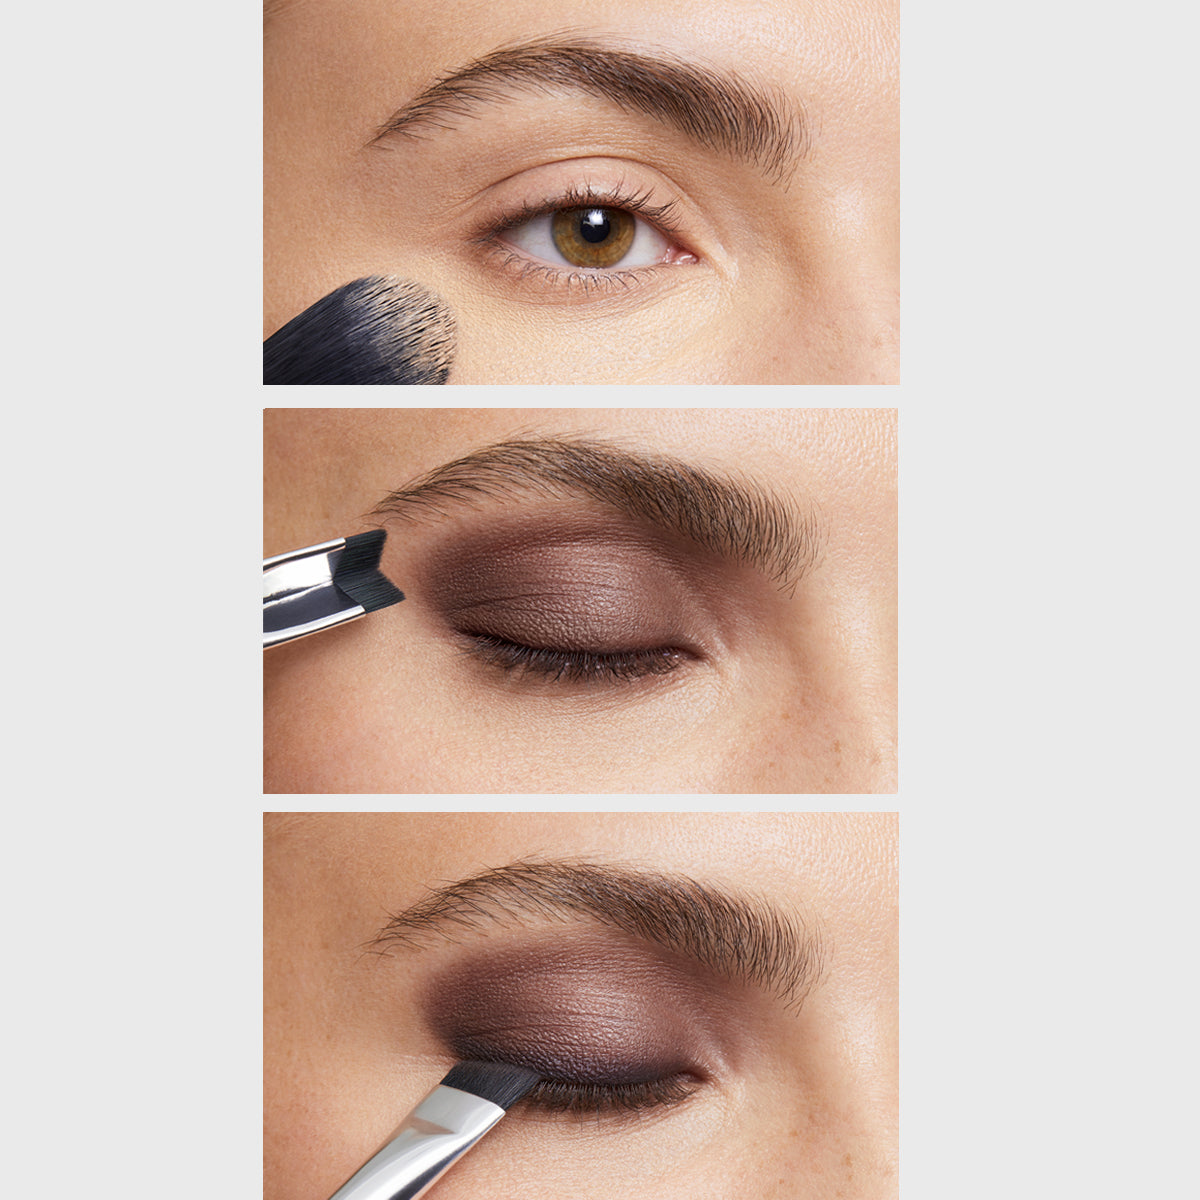 Steps to achieving the smokey eye using the palette and brush